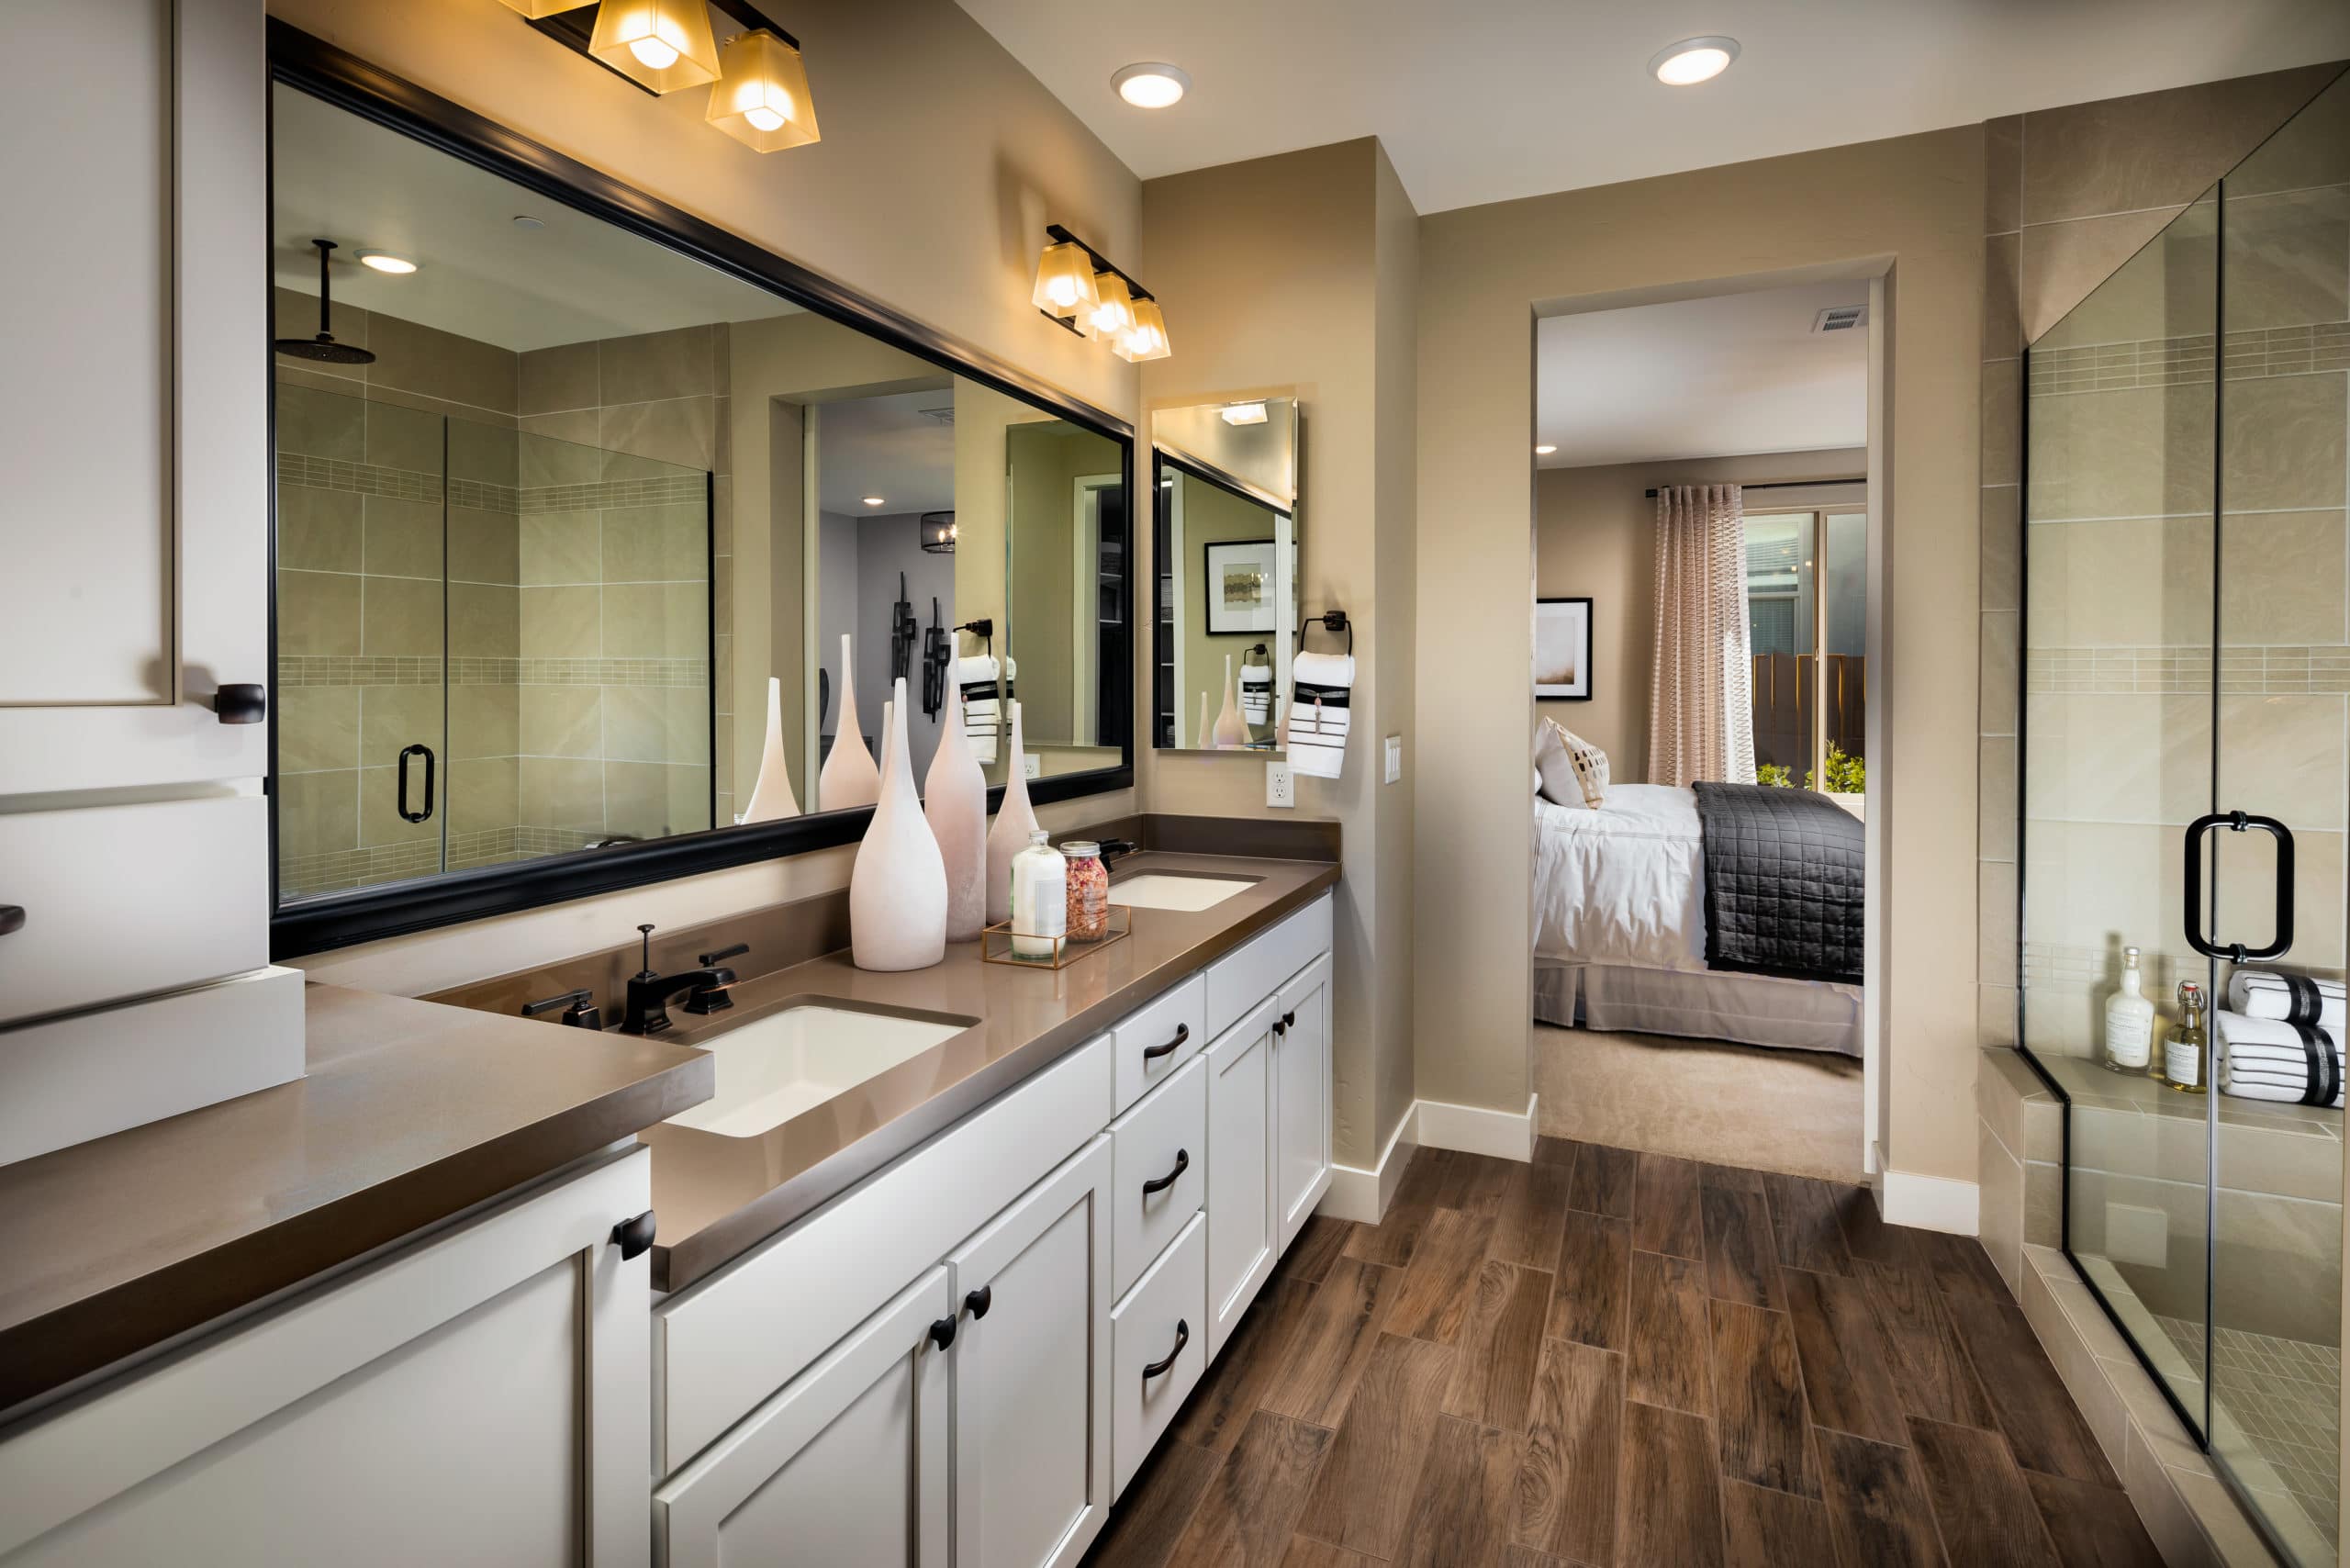 Master Bath in Retreat Model in Resort Collection in Trilogy by Shea Homes in South Square in Summerlin